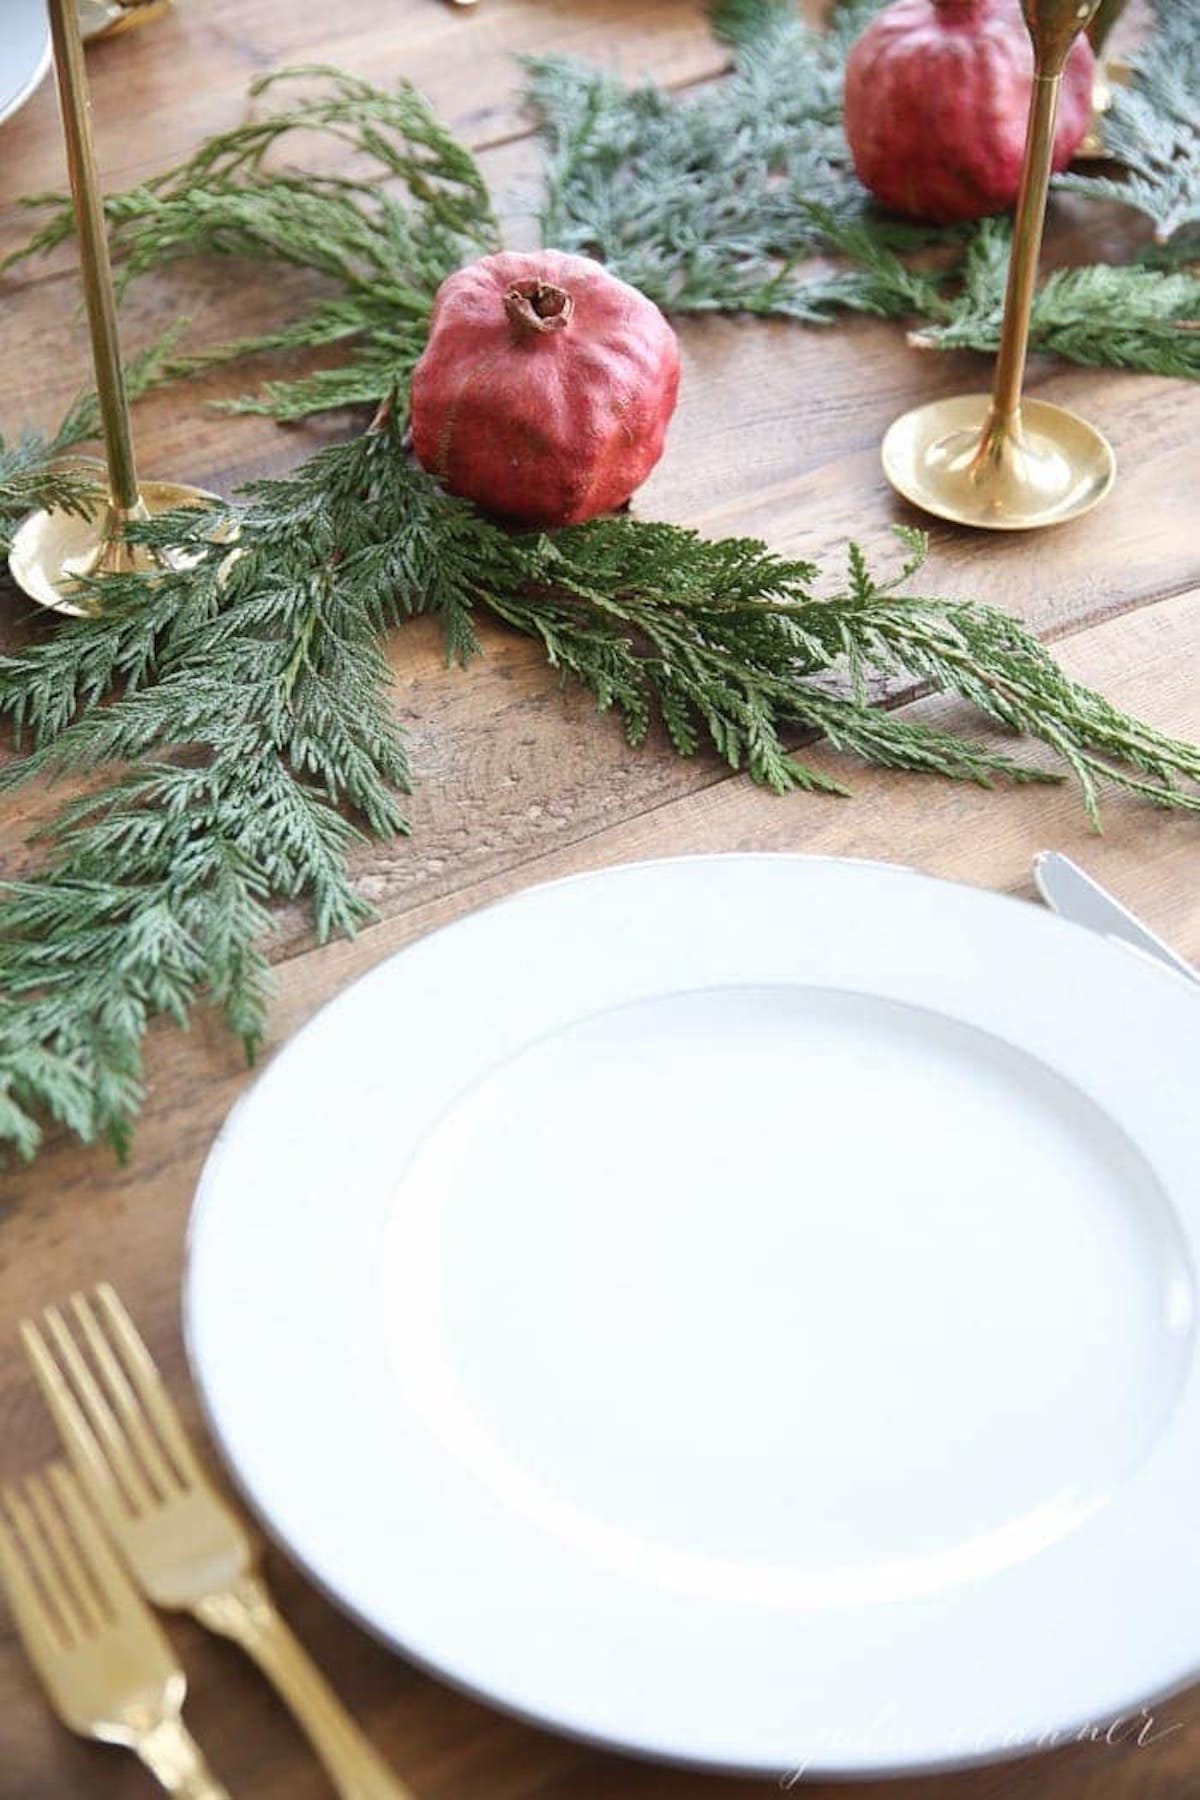 A festive Christmas table setting featuring a Christmas candle centerpiece adorned with pomegranates and greenery.